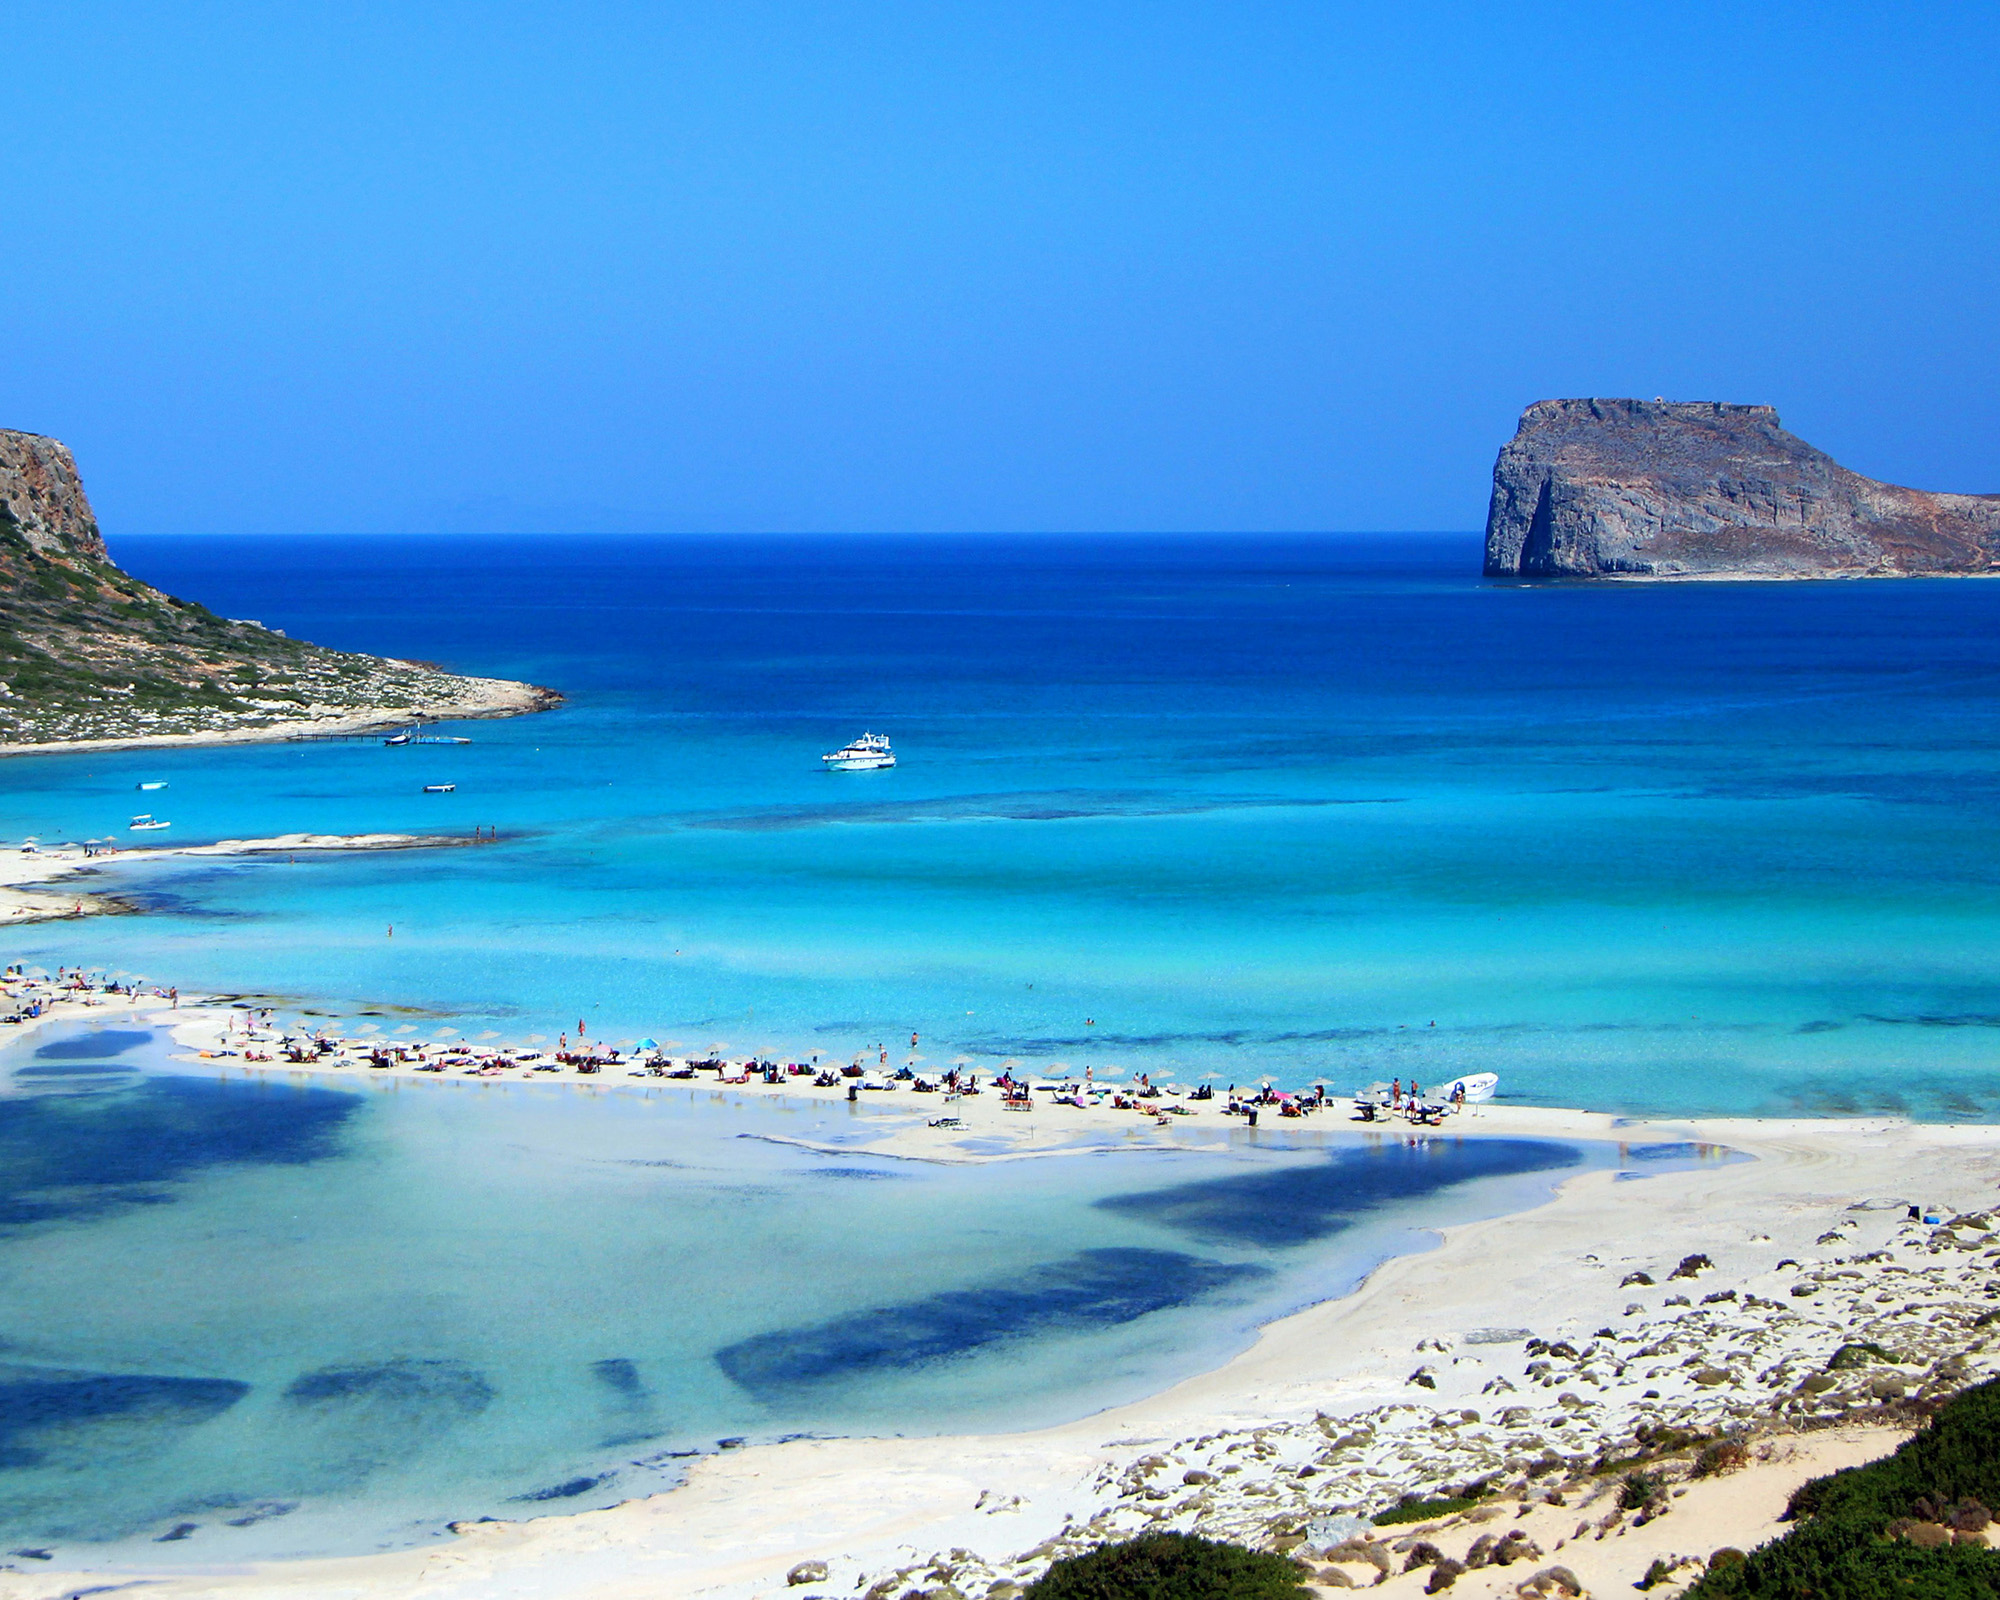 Situated on the northwest coast of Crete, Balos Lagoon is a breathtaking natural wonder with shallow turquoise waters, white sandbars, and pink-hued sand.